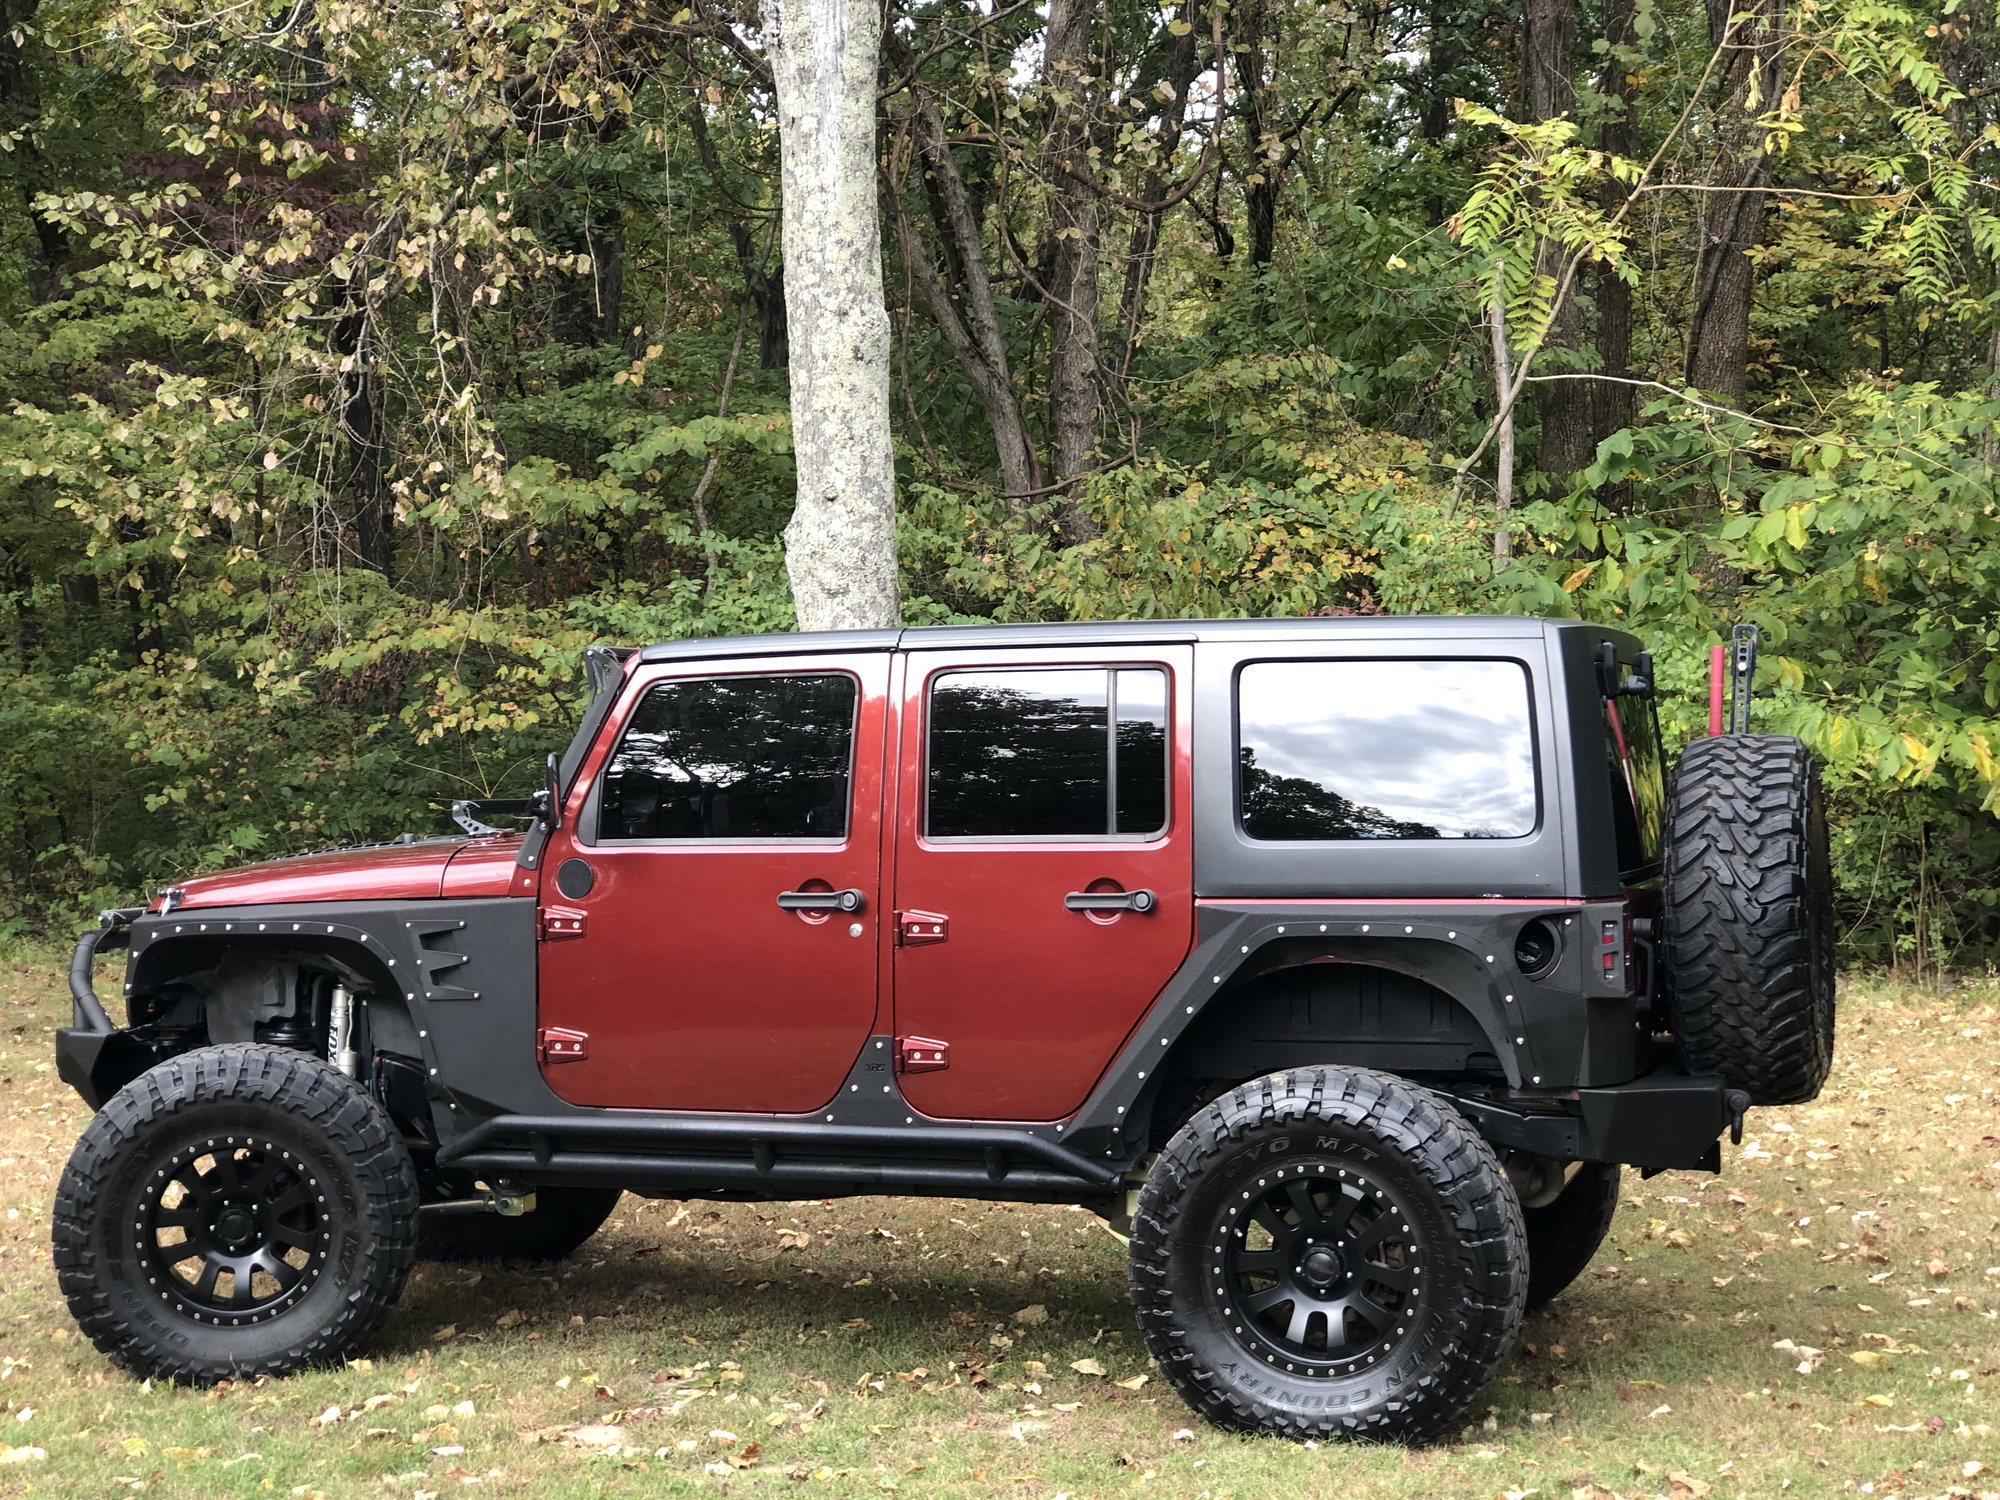 2008 Jeep Wrangler LS2 Motech V8 Conversion  - The top  destination for Jeep JK and JL Wrangler news, rumors, and discussion